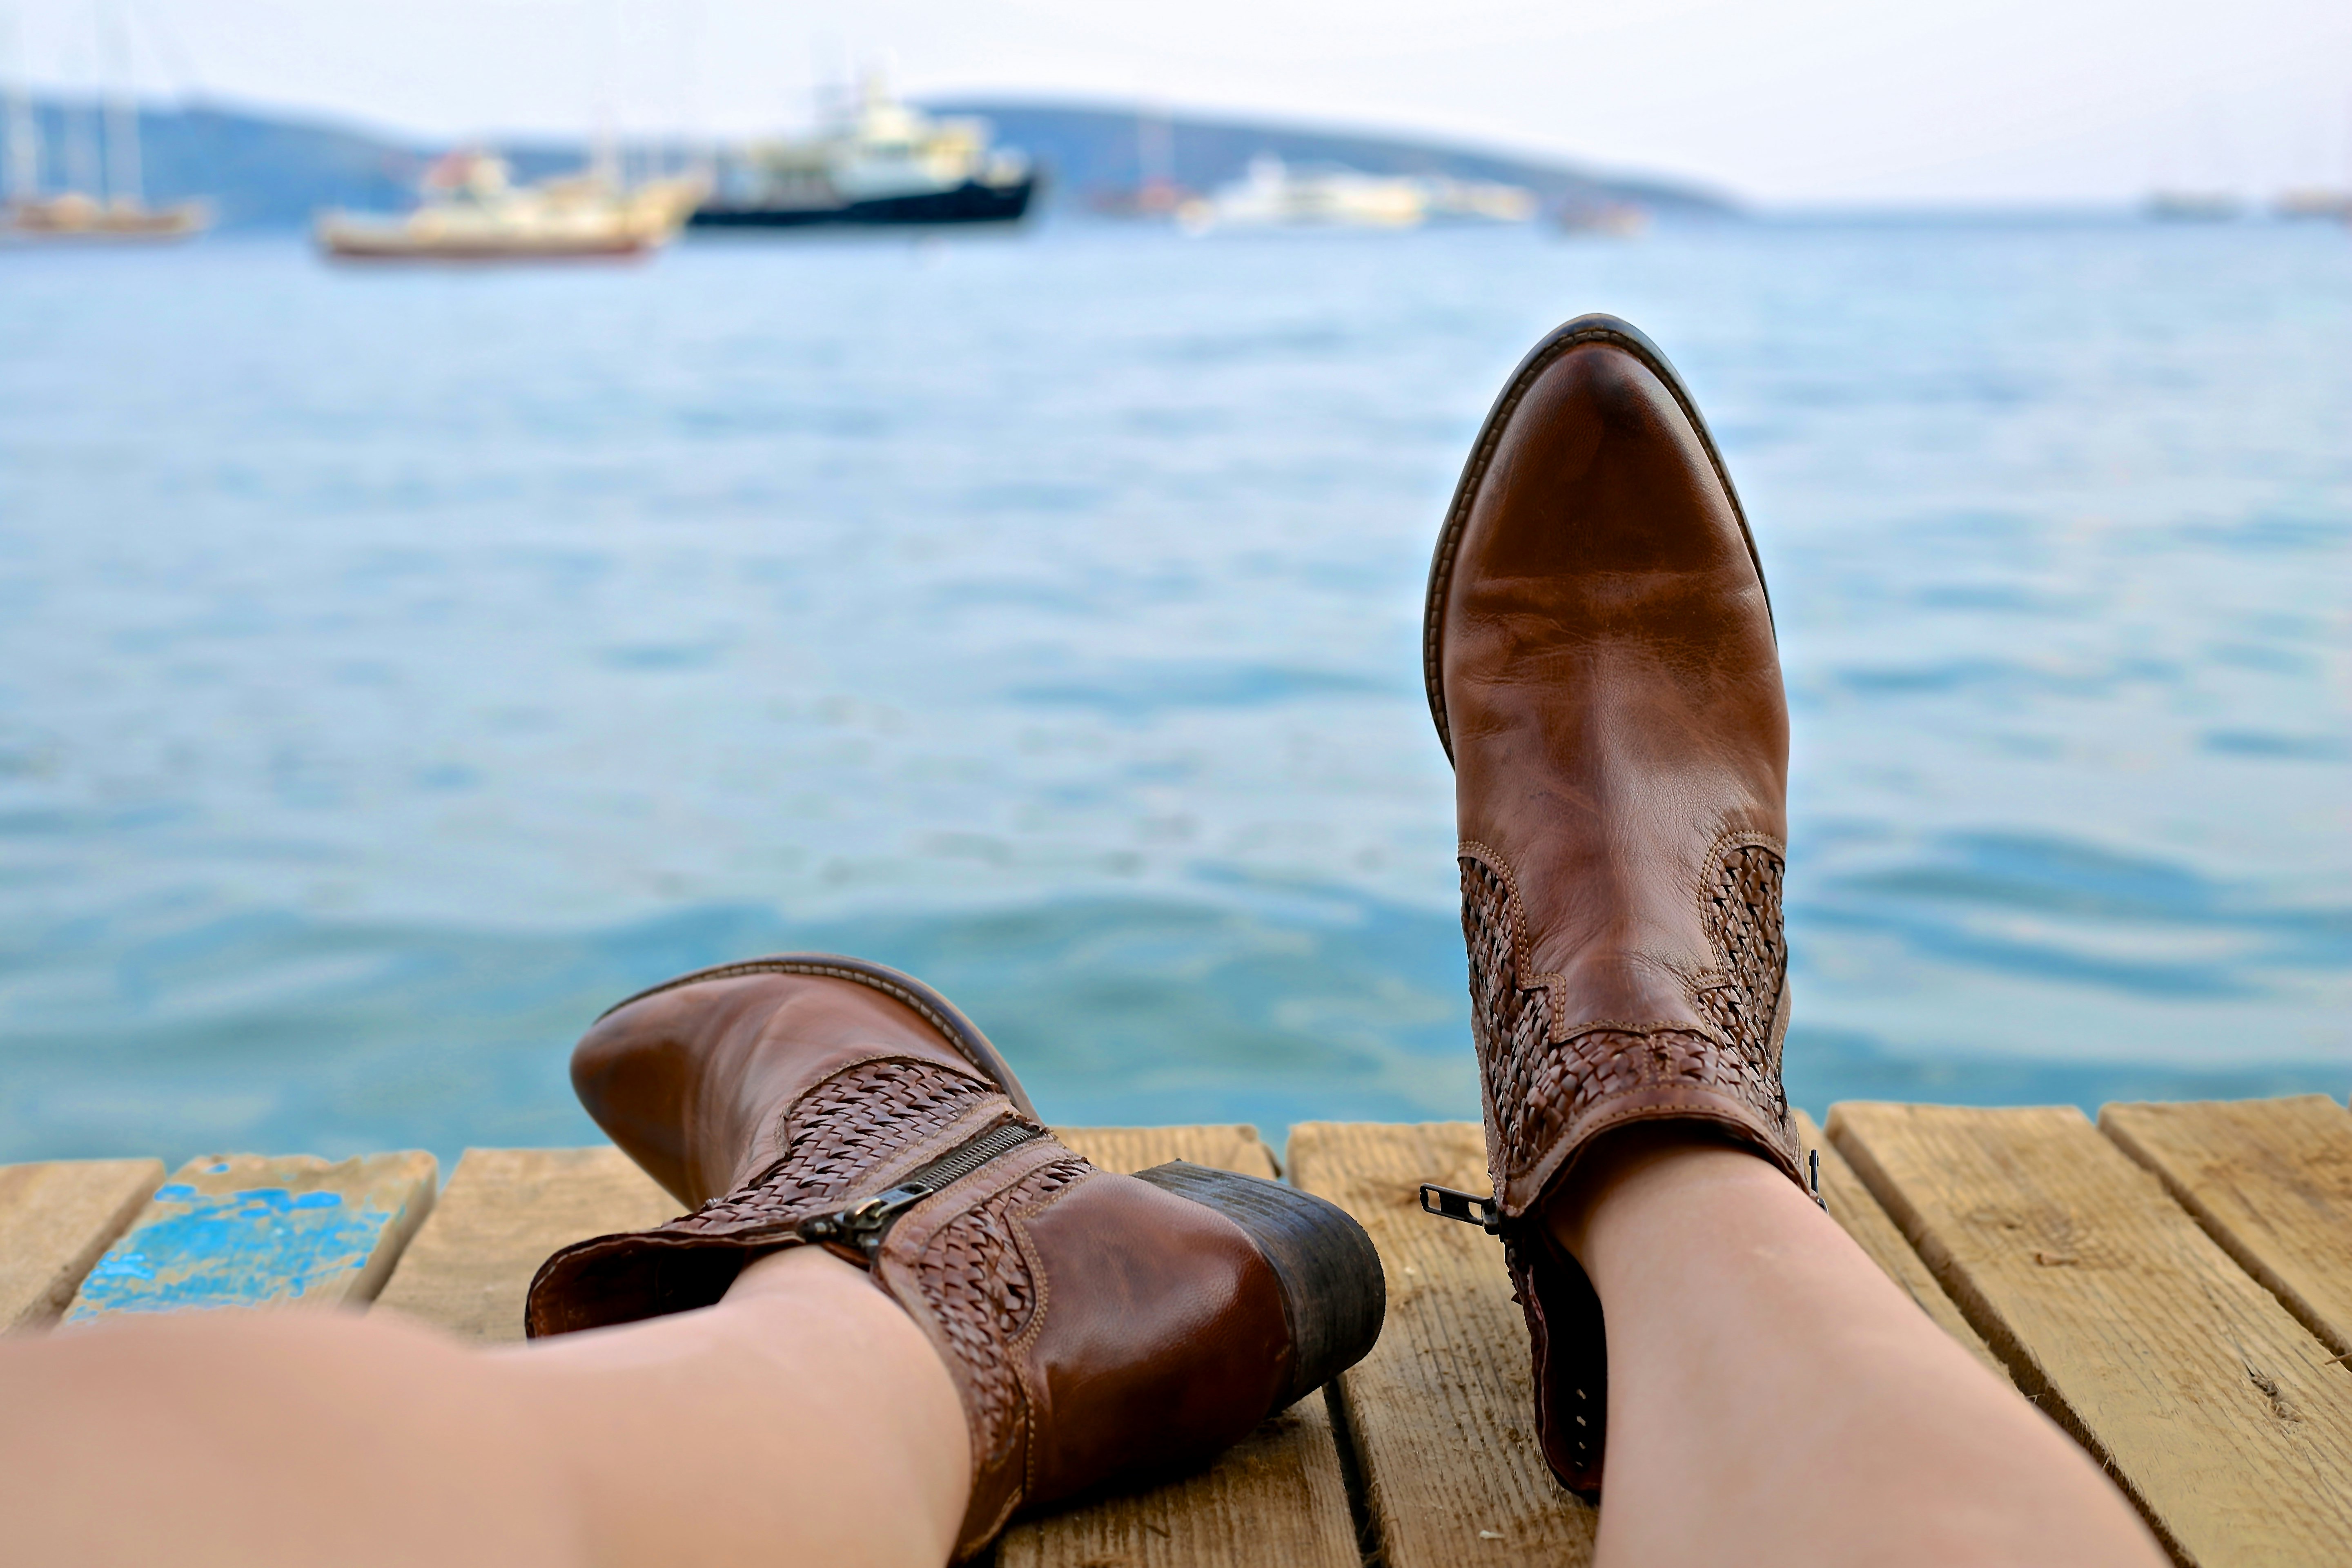 person wearing brown leather side-zip boots sits on brown wooden pier near body of water during daytime